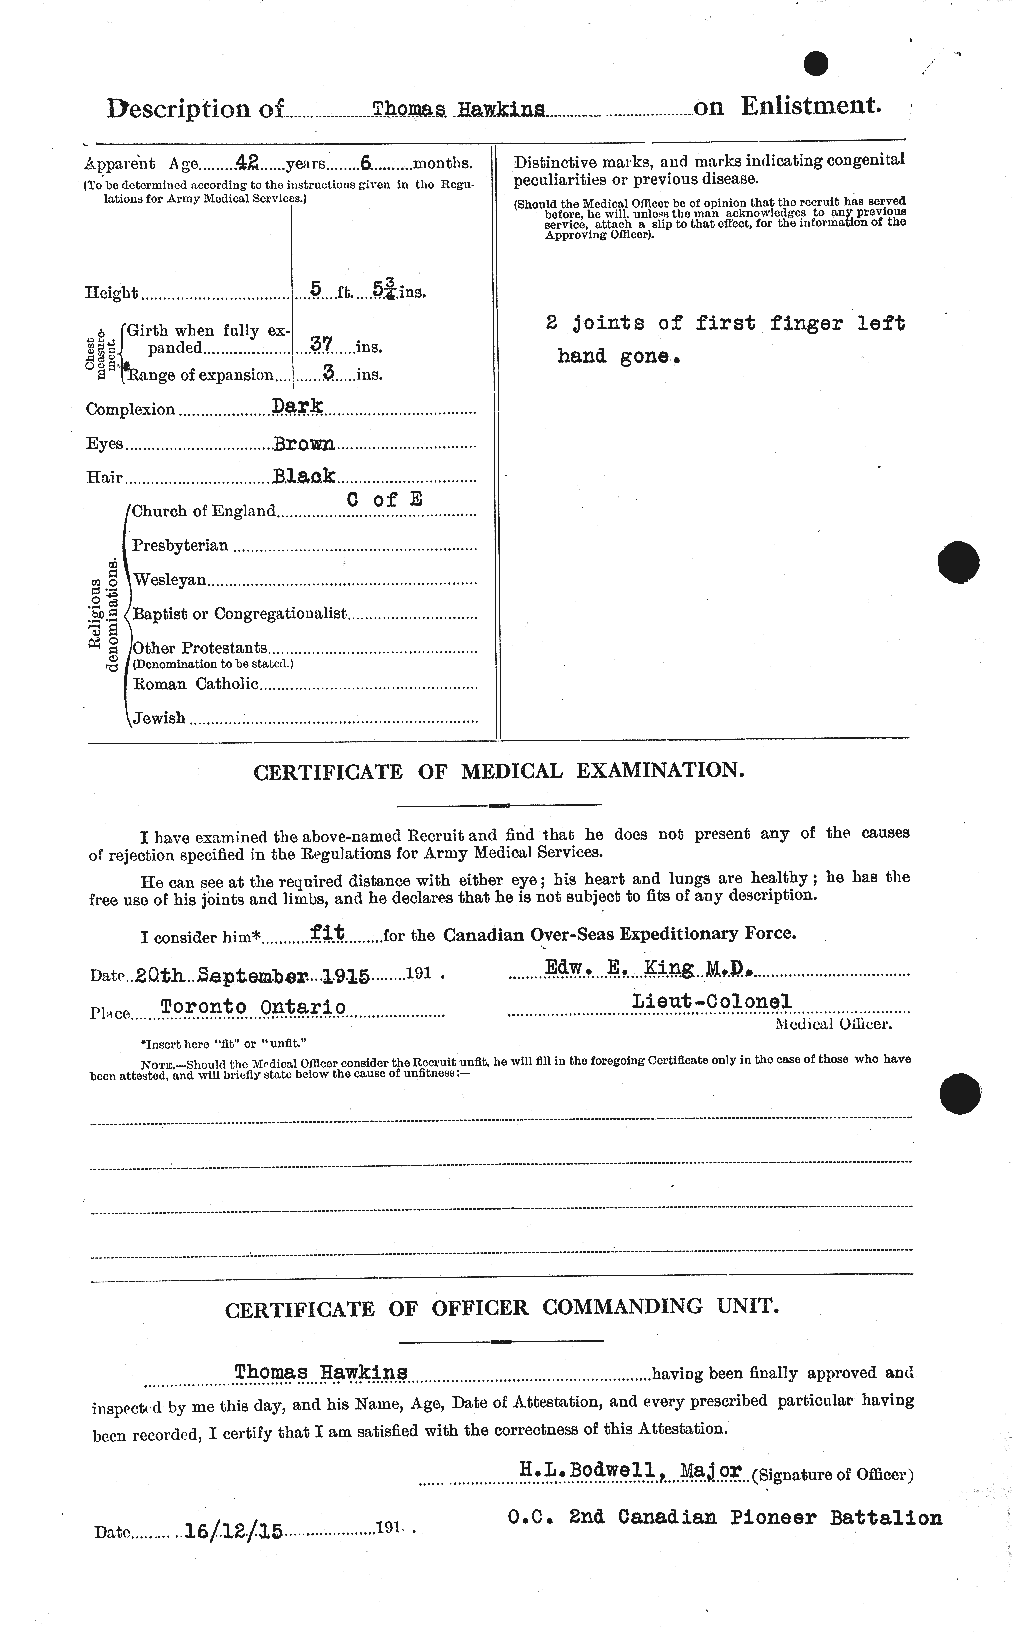 Personnel Records of the First World War - CEF 385619b